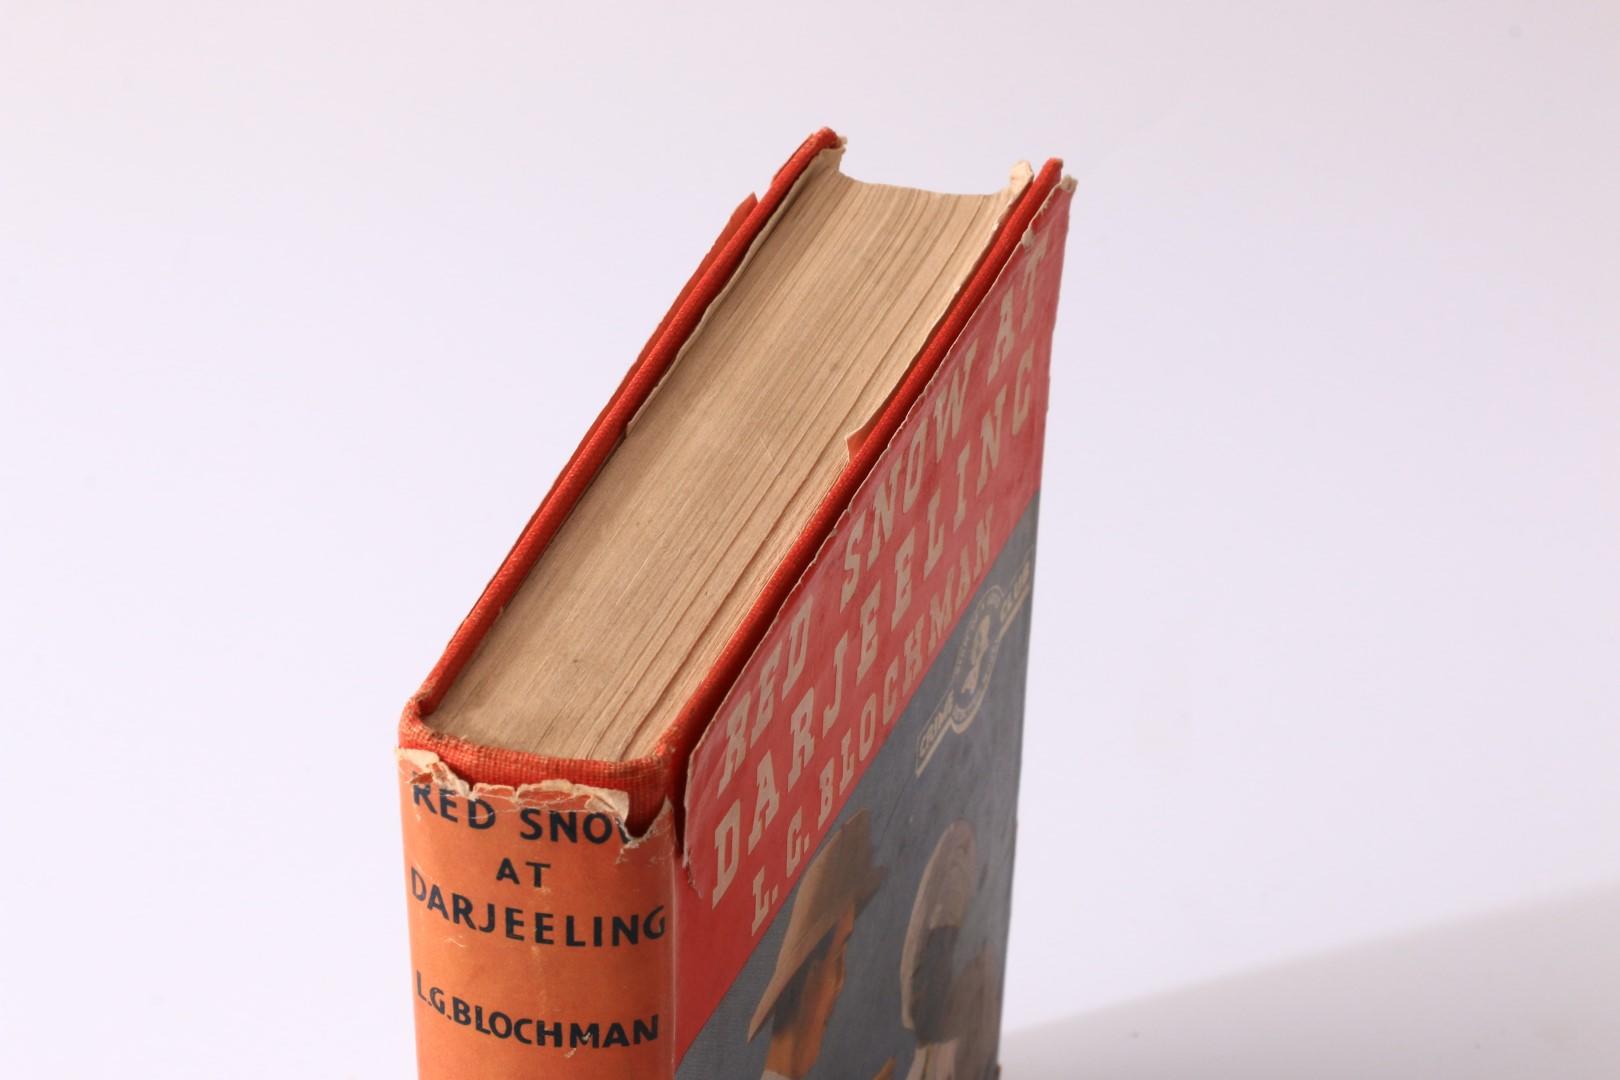 L.G. Blochman - Red Snow at Darjeeling - The Crime Club, 1938, First Edition.